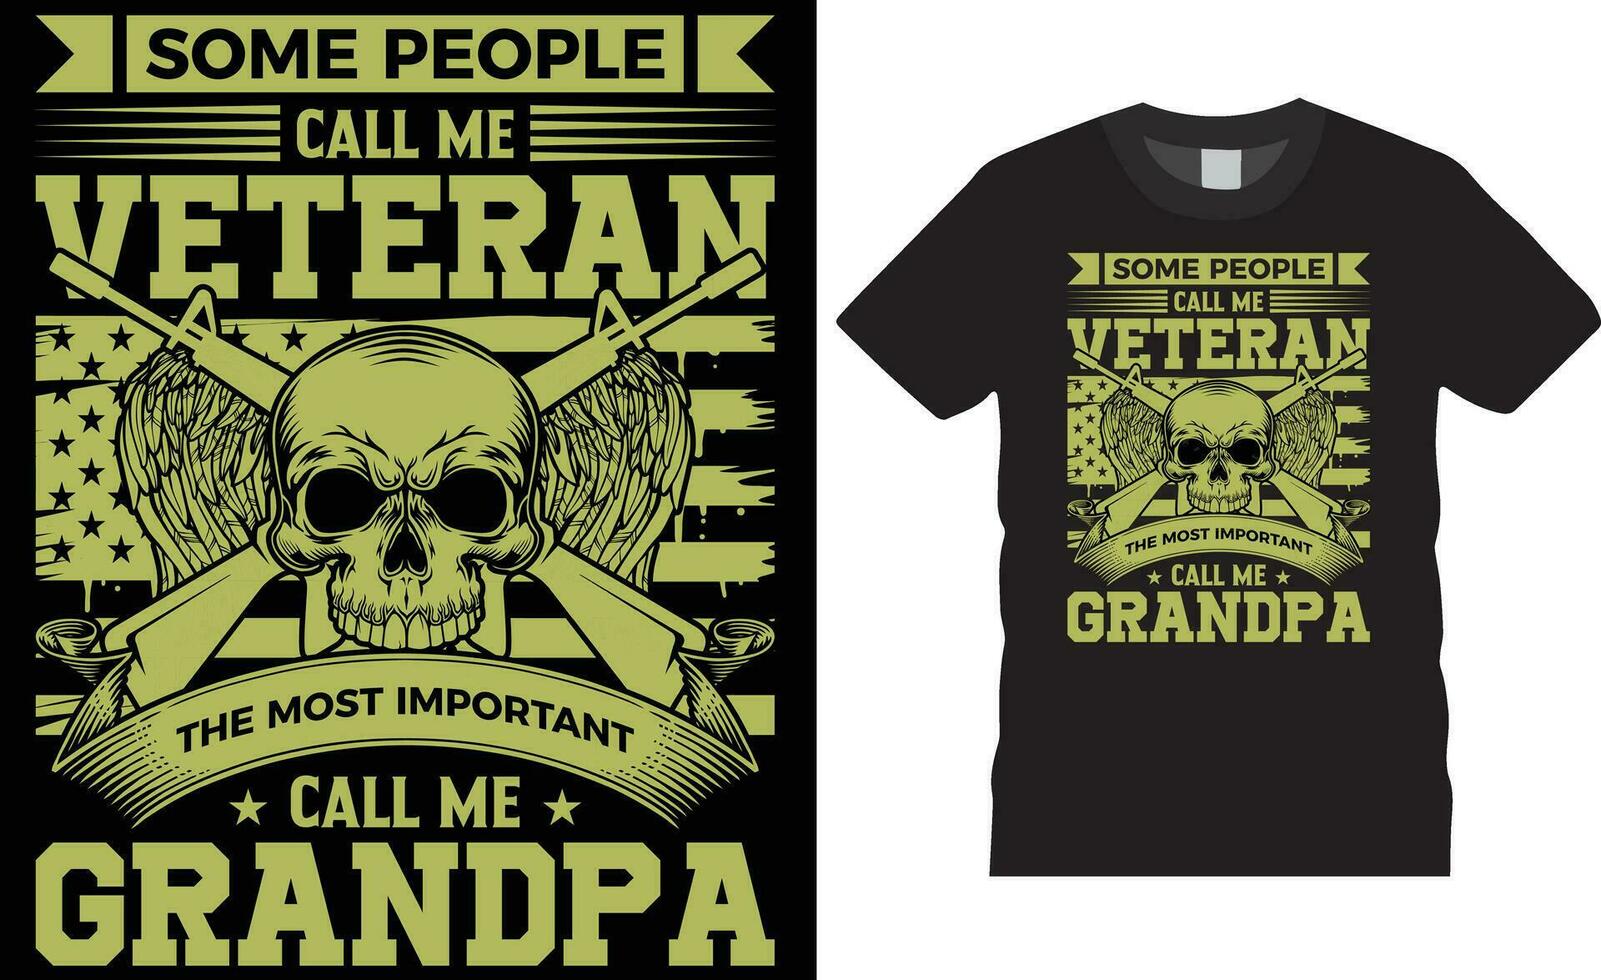 Some people call me veteran the most important call me grandpa American Veteran typography t-shirt design vector template.